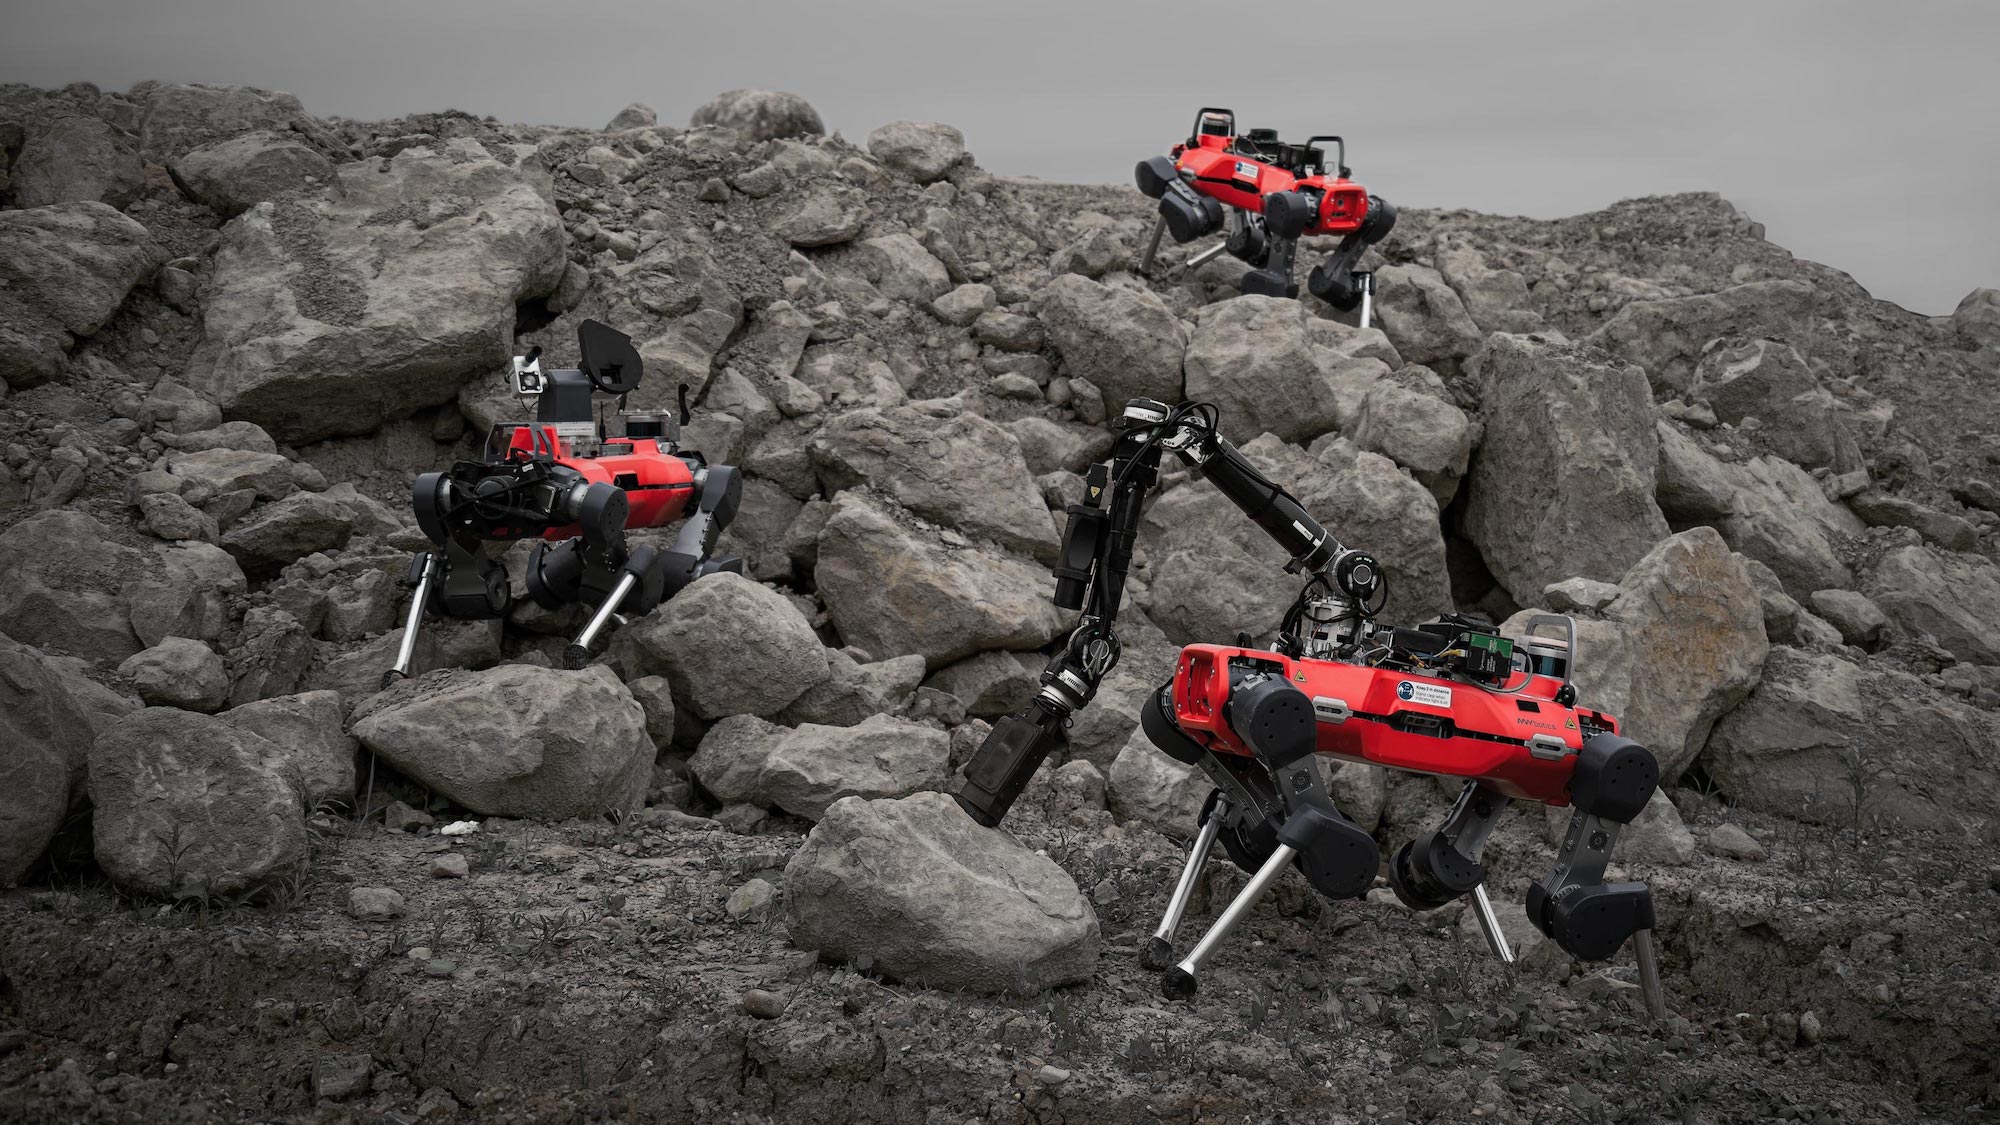 Four-legged dog robots could one day explore the moon